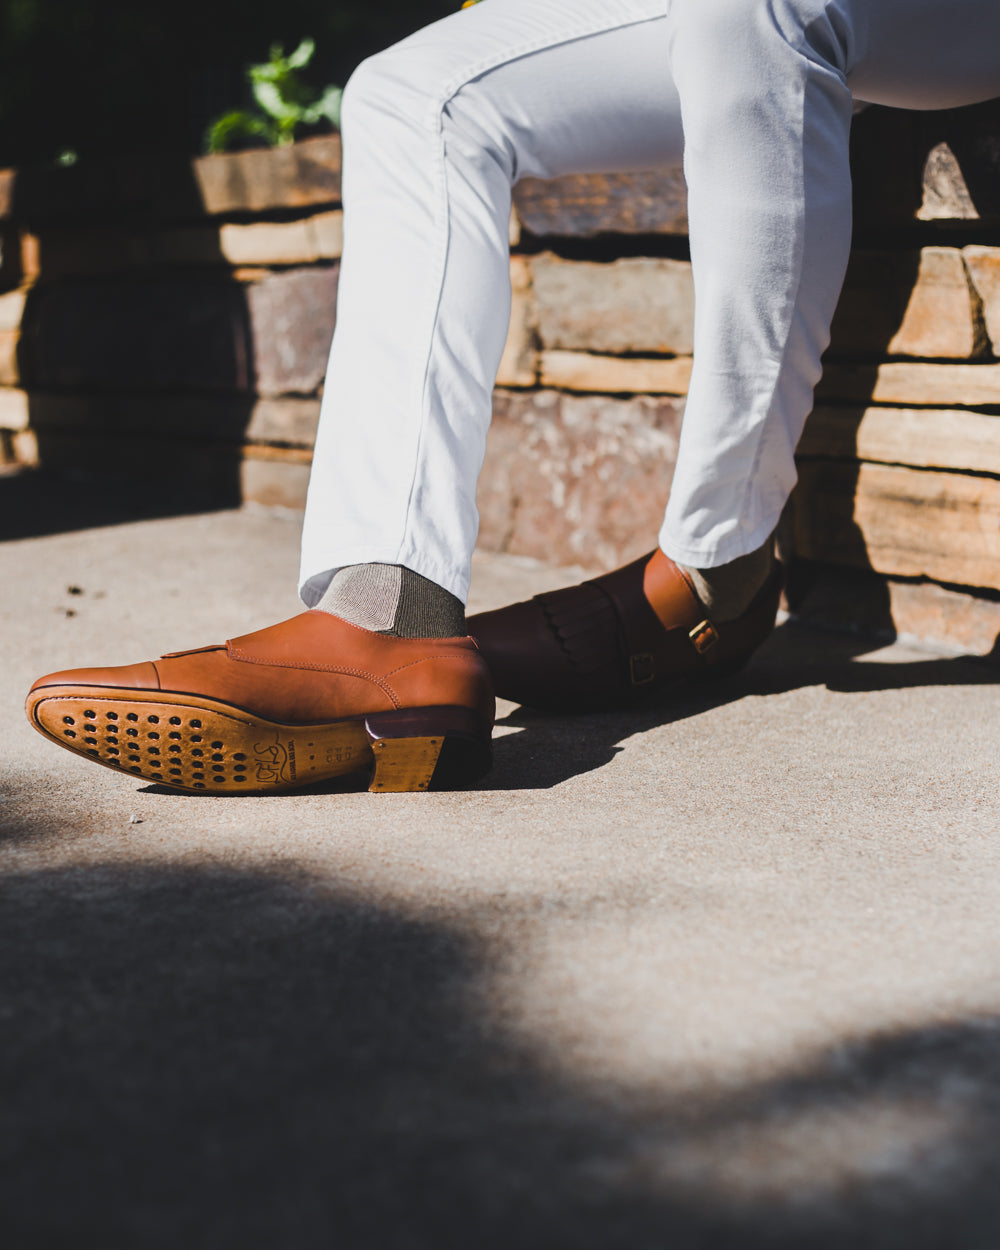 light grey over the calf dress socks with brown stripe, white pants, brown dress shoes